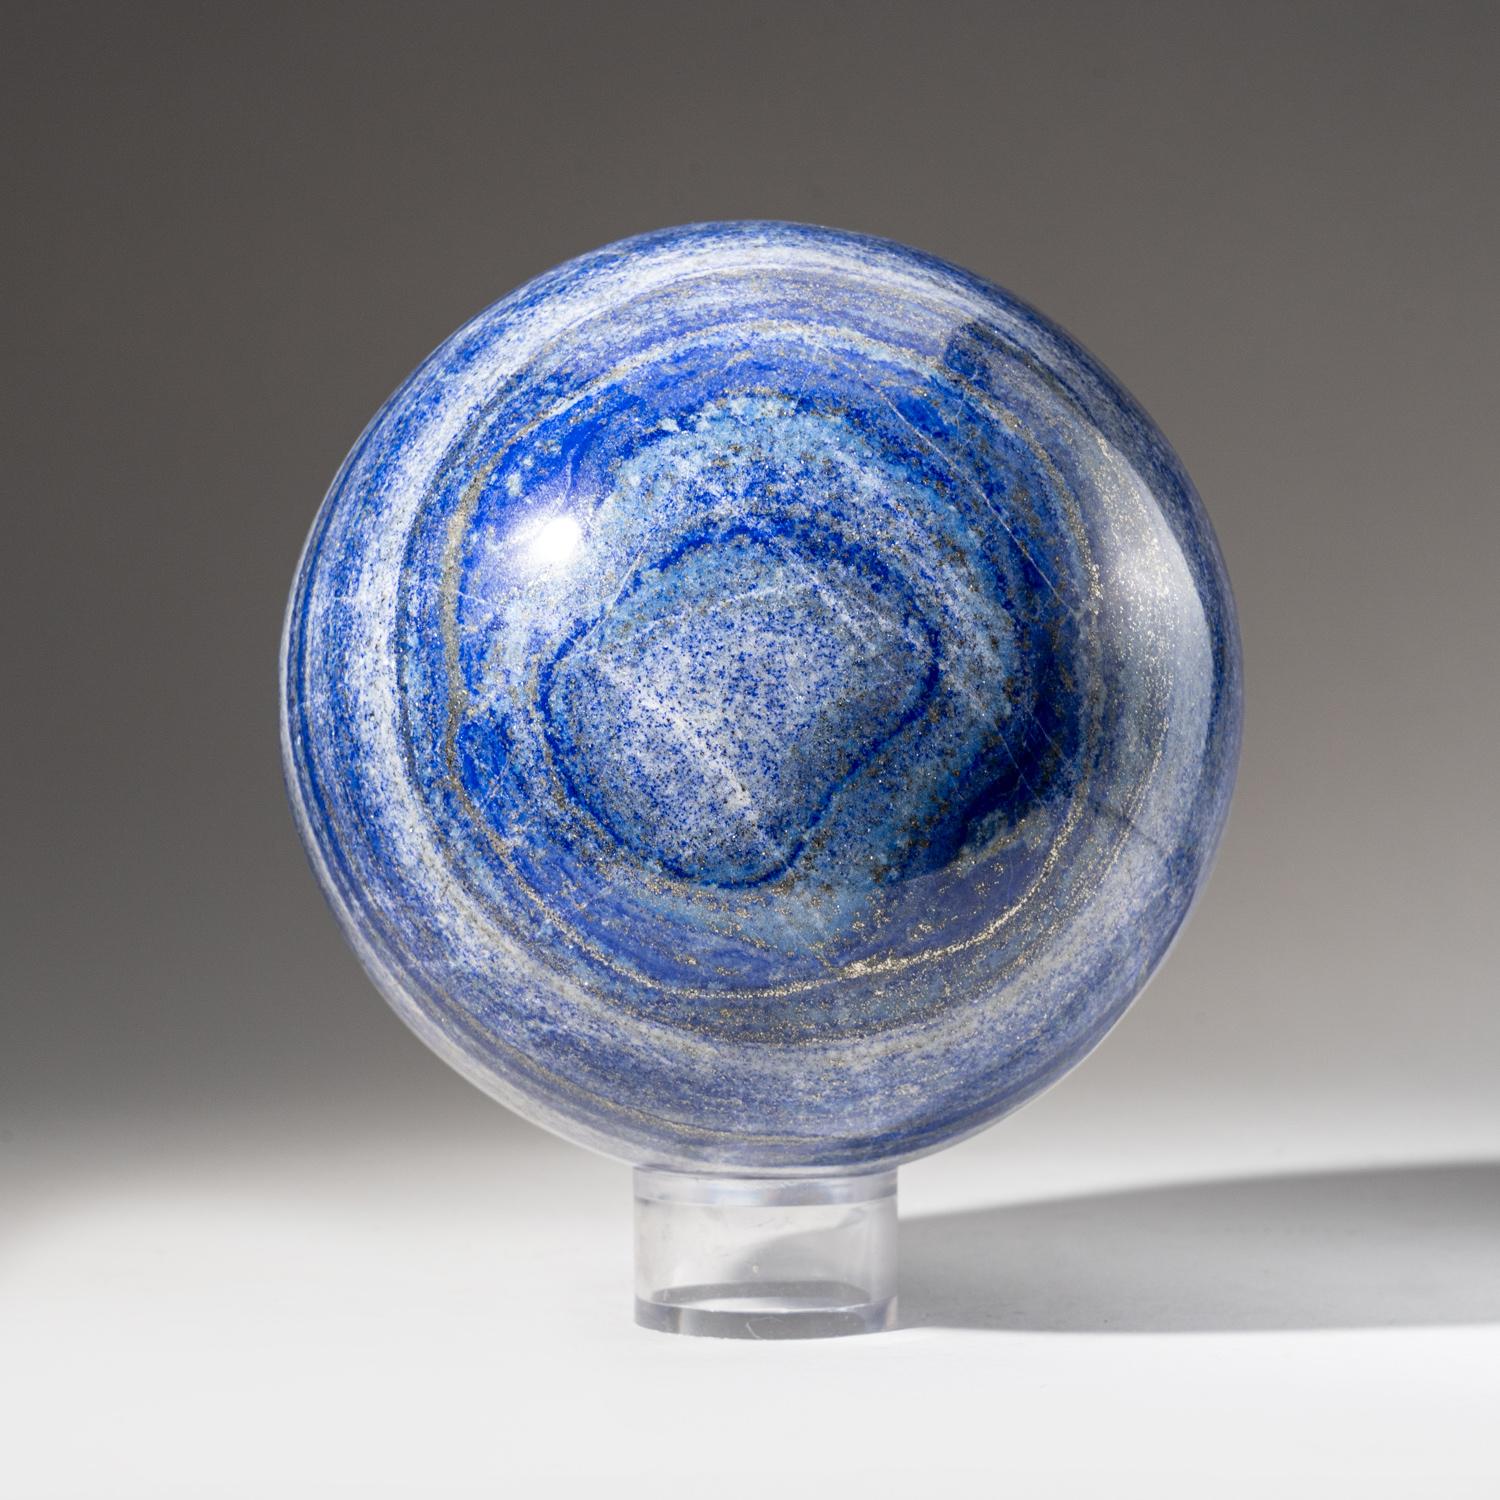 Crystal Polished Lapis Lazuli Sphere from Afghanistan (5.5